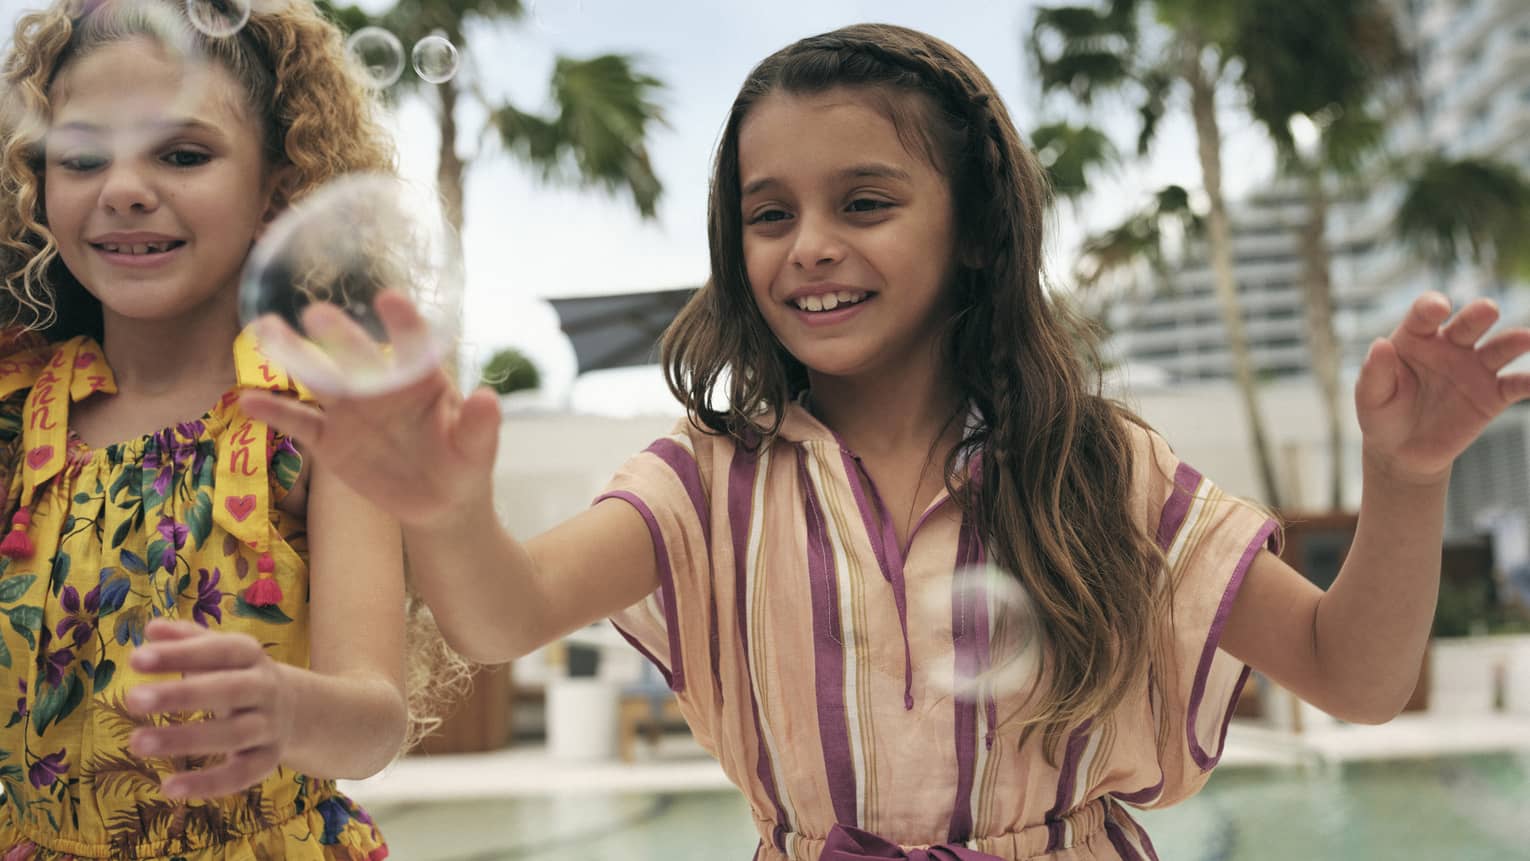 Two young girls near a pool playing with bubbles.